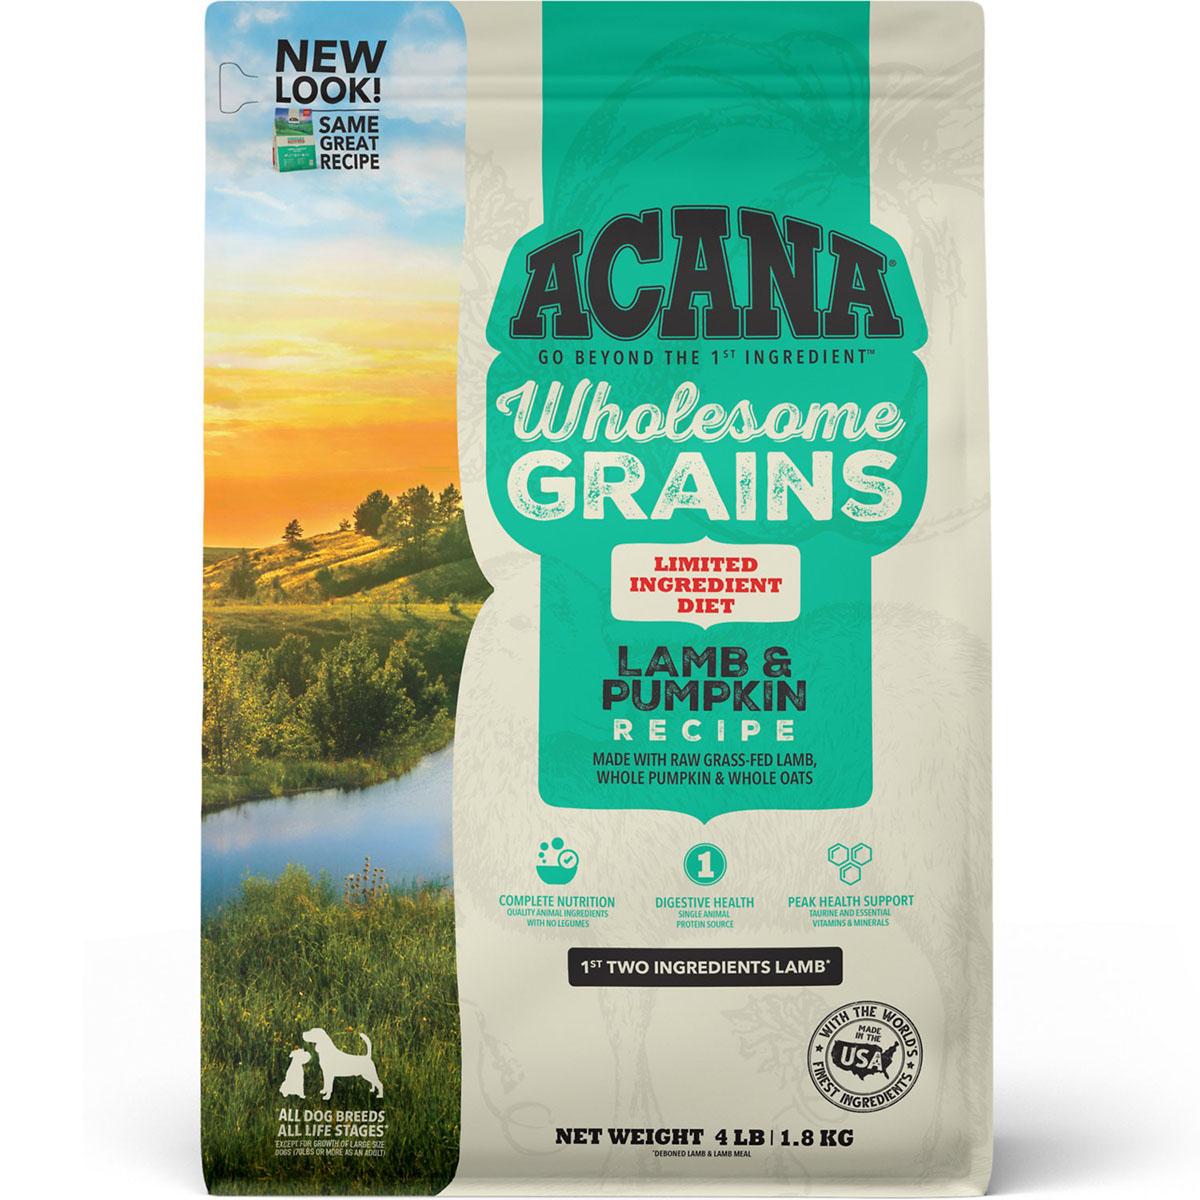 Acana Wholesome Grains Limited Ingredient Lamb & Pumpkin Recipe Dry Dog Food